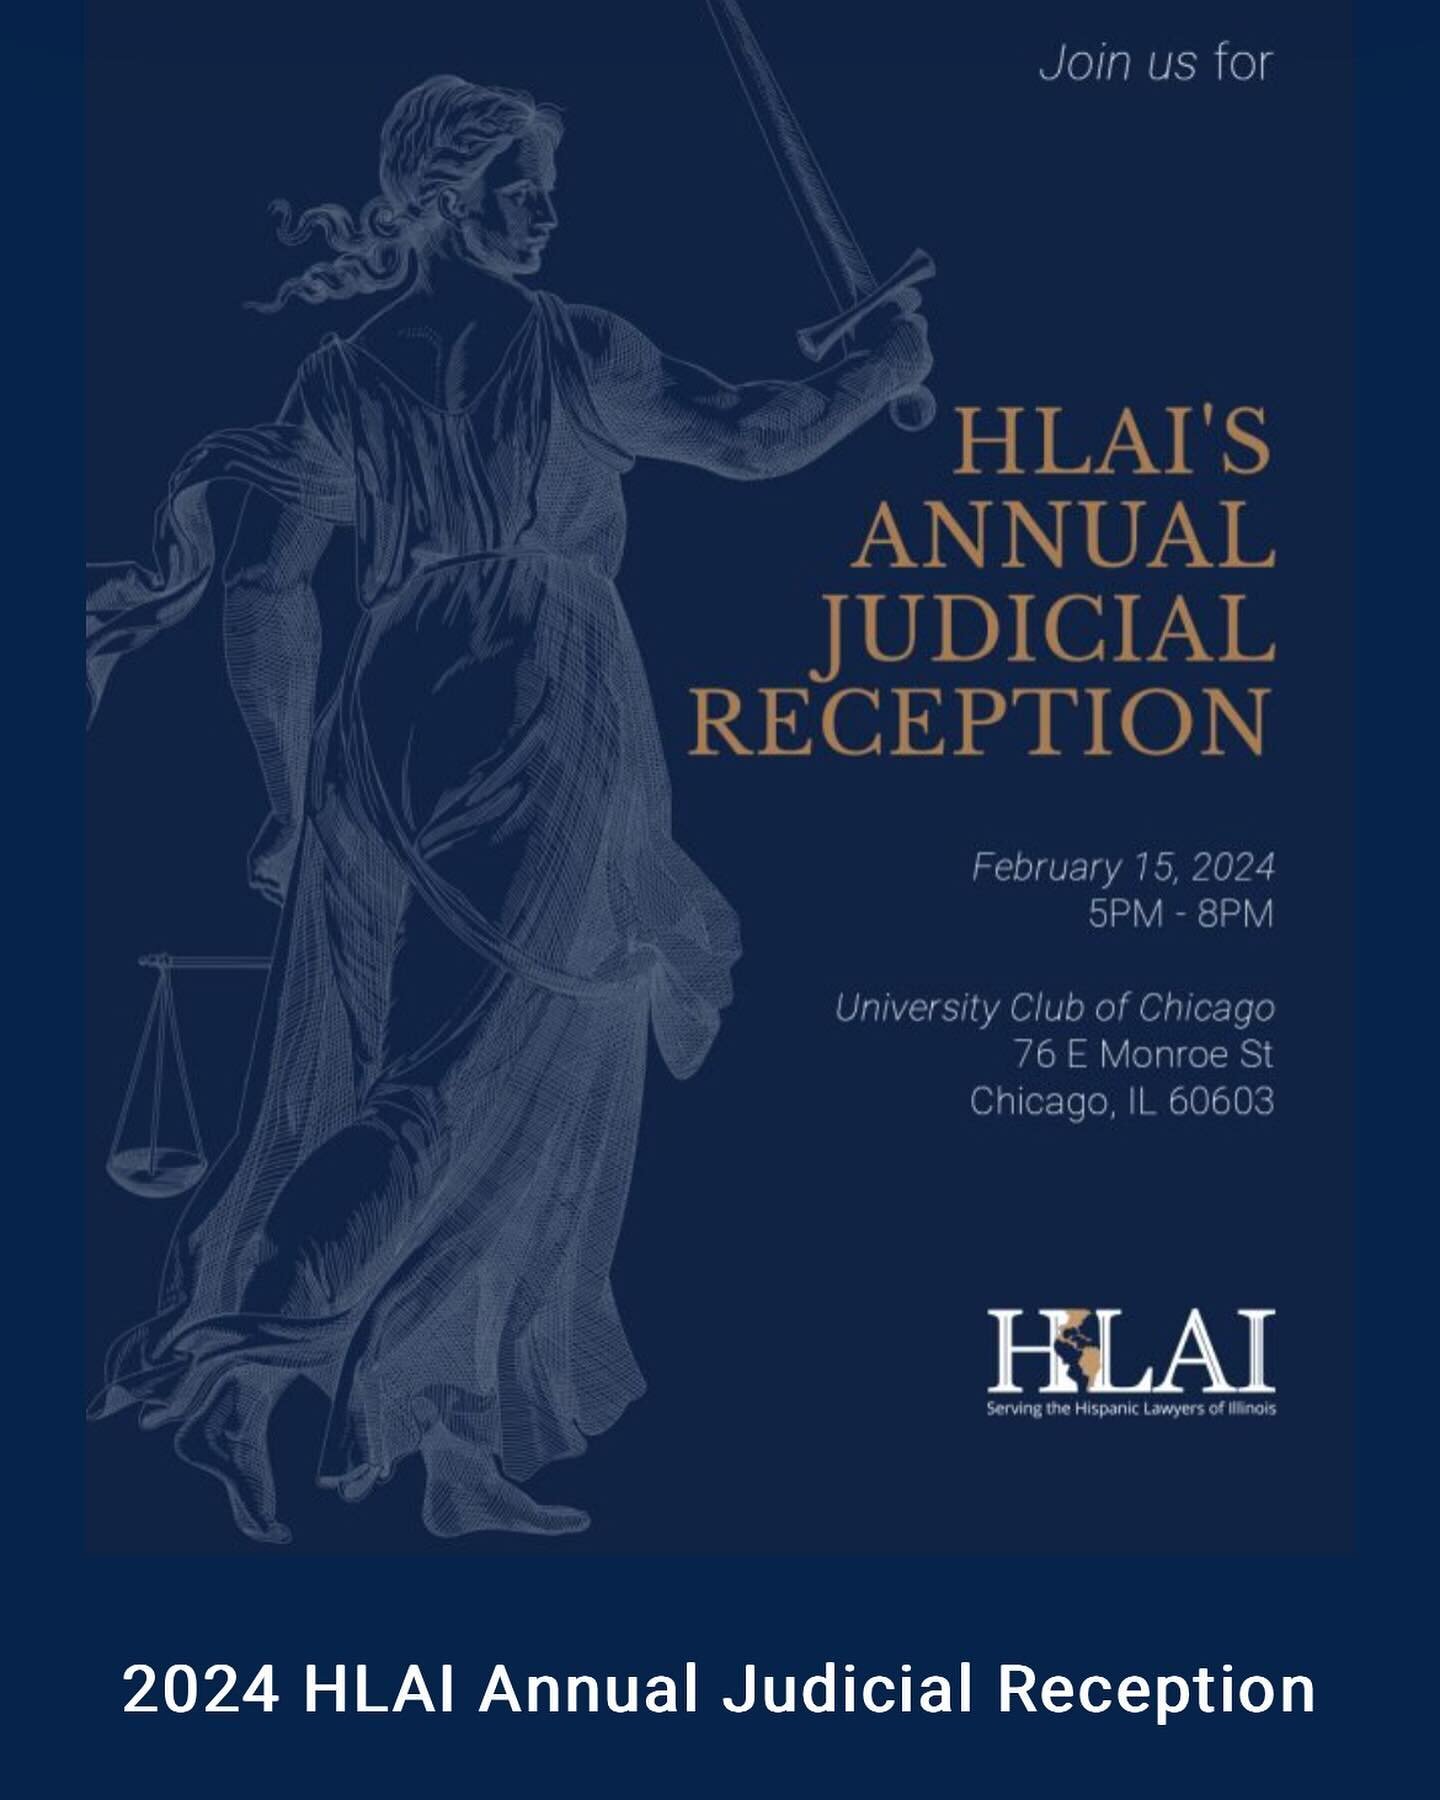 Last night was an amazing honor to attend HLAI&rsquo;s Judicial Reception as a judge for the first time. The Latino Judges and lawyers are always so warm and welcoming. It was at this event last year I was encouraged to run. I saw many friends includ